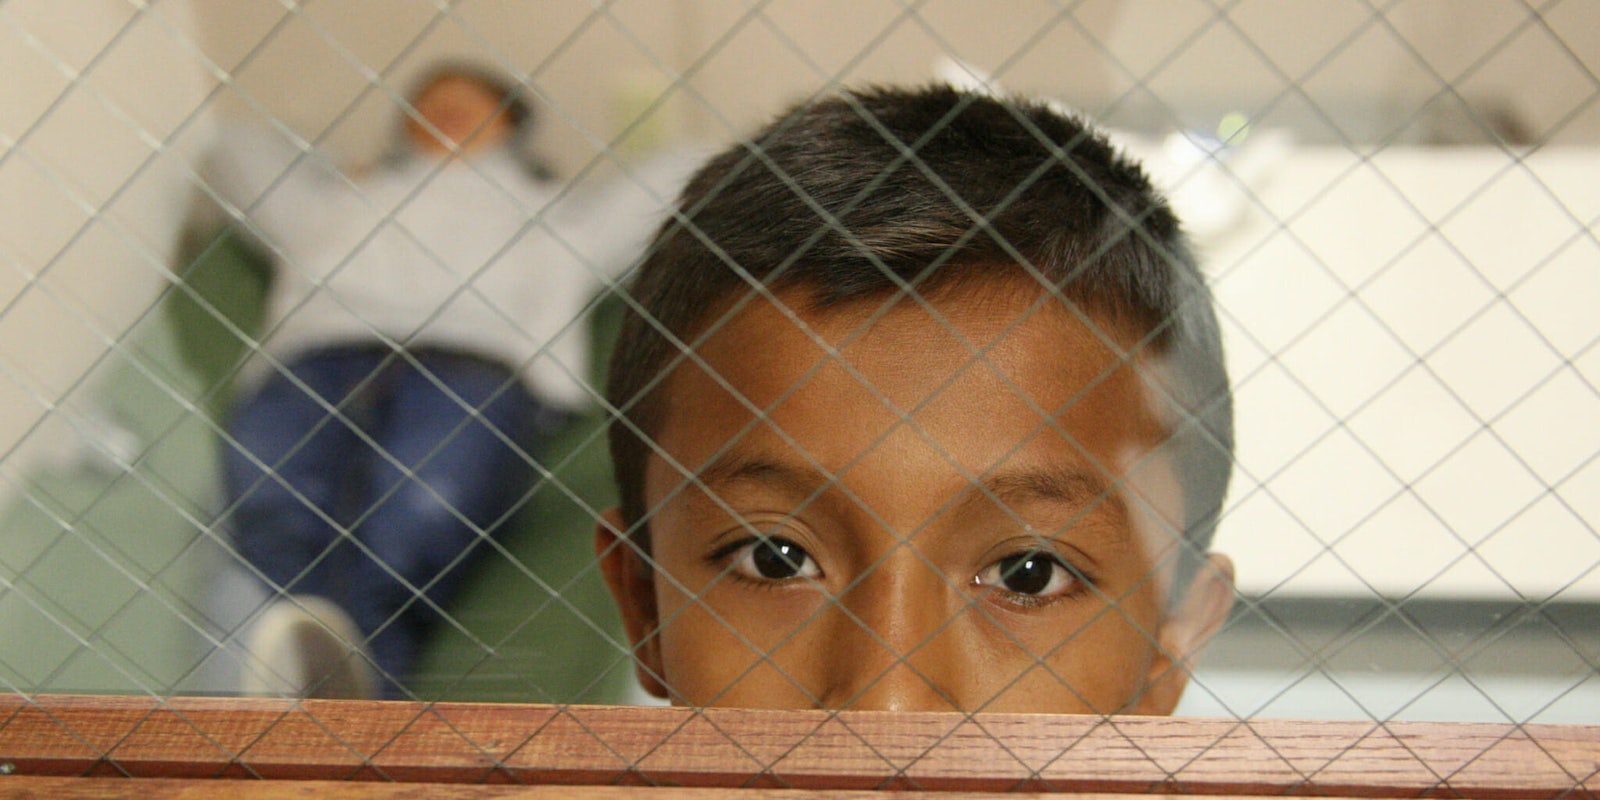 U.S. Customs and Border Protection houses unaccompanied migrant children who have crossed into the U.S.